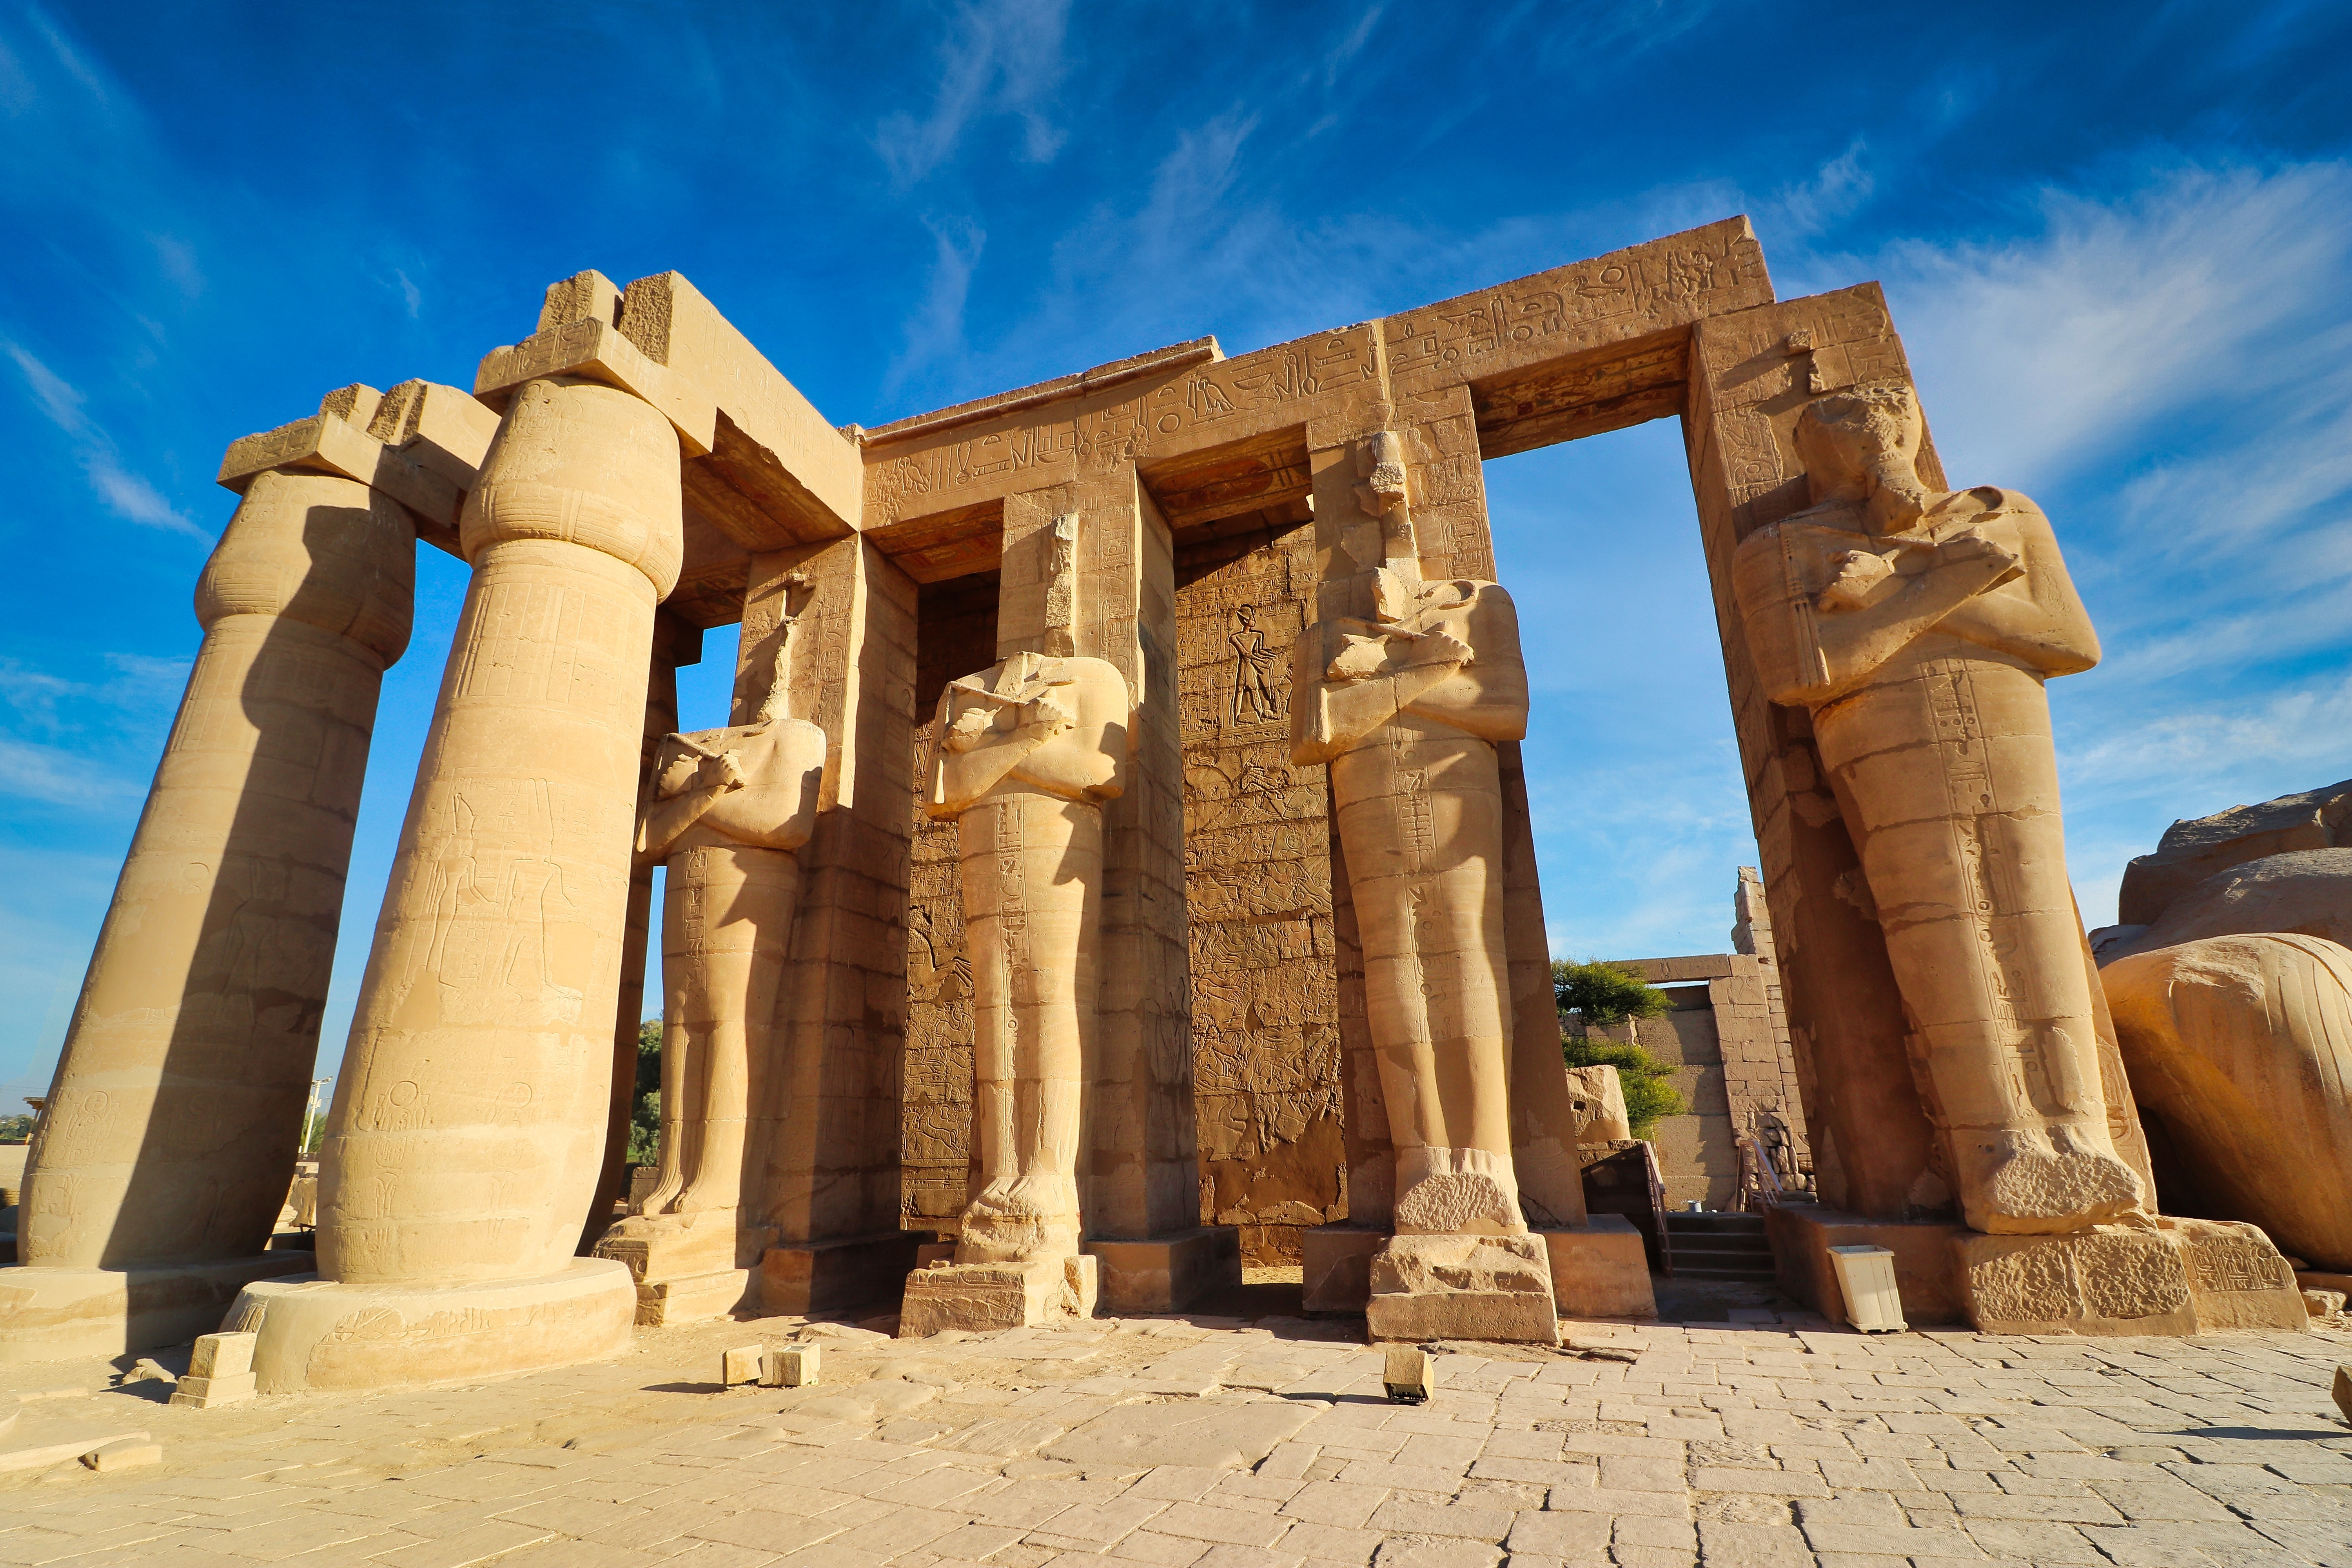 View of the Ramesses statues at the entrance to the Ramesseum, the Mortuary Temple of Pharoah Ramesses II the Great on a bright afternoon with blue skies at Luxor, Egypt